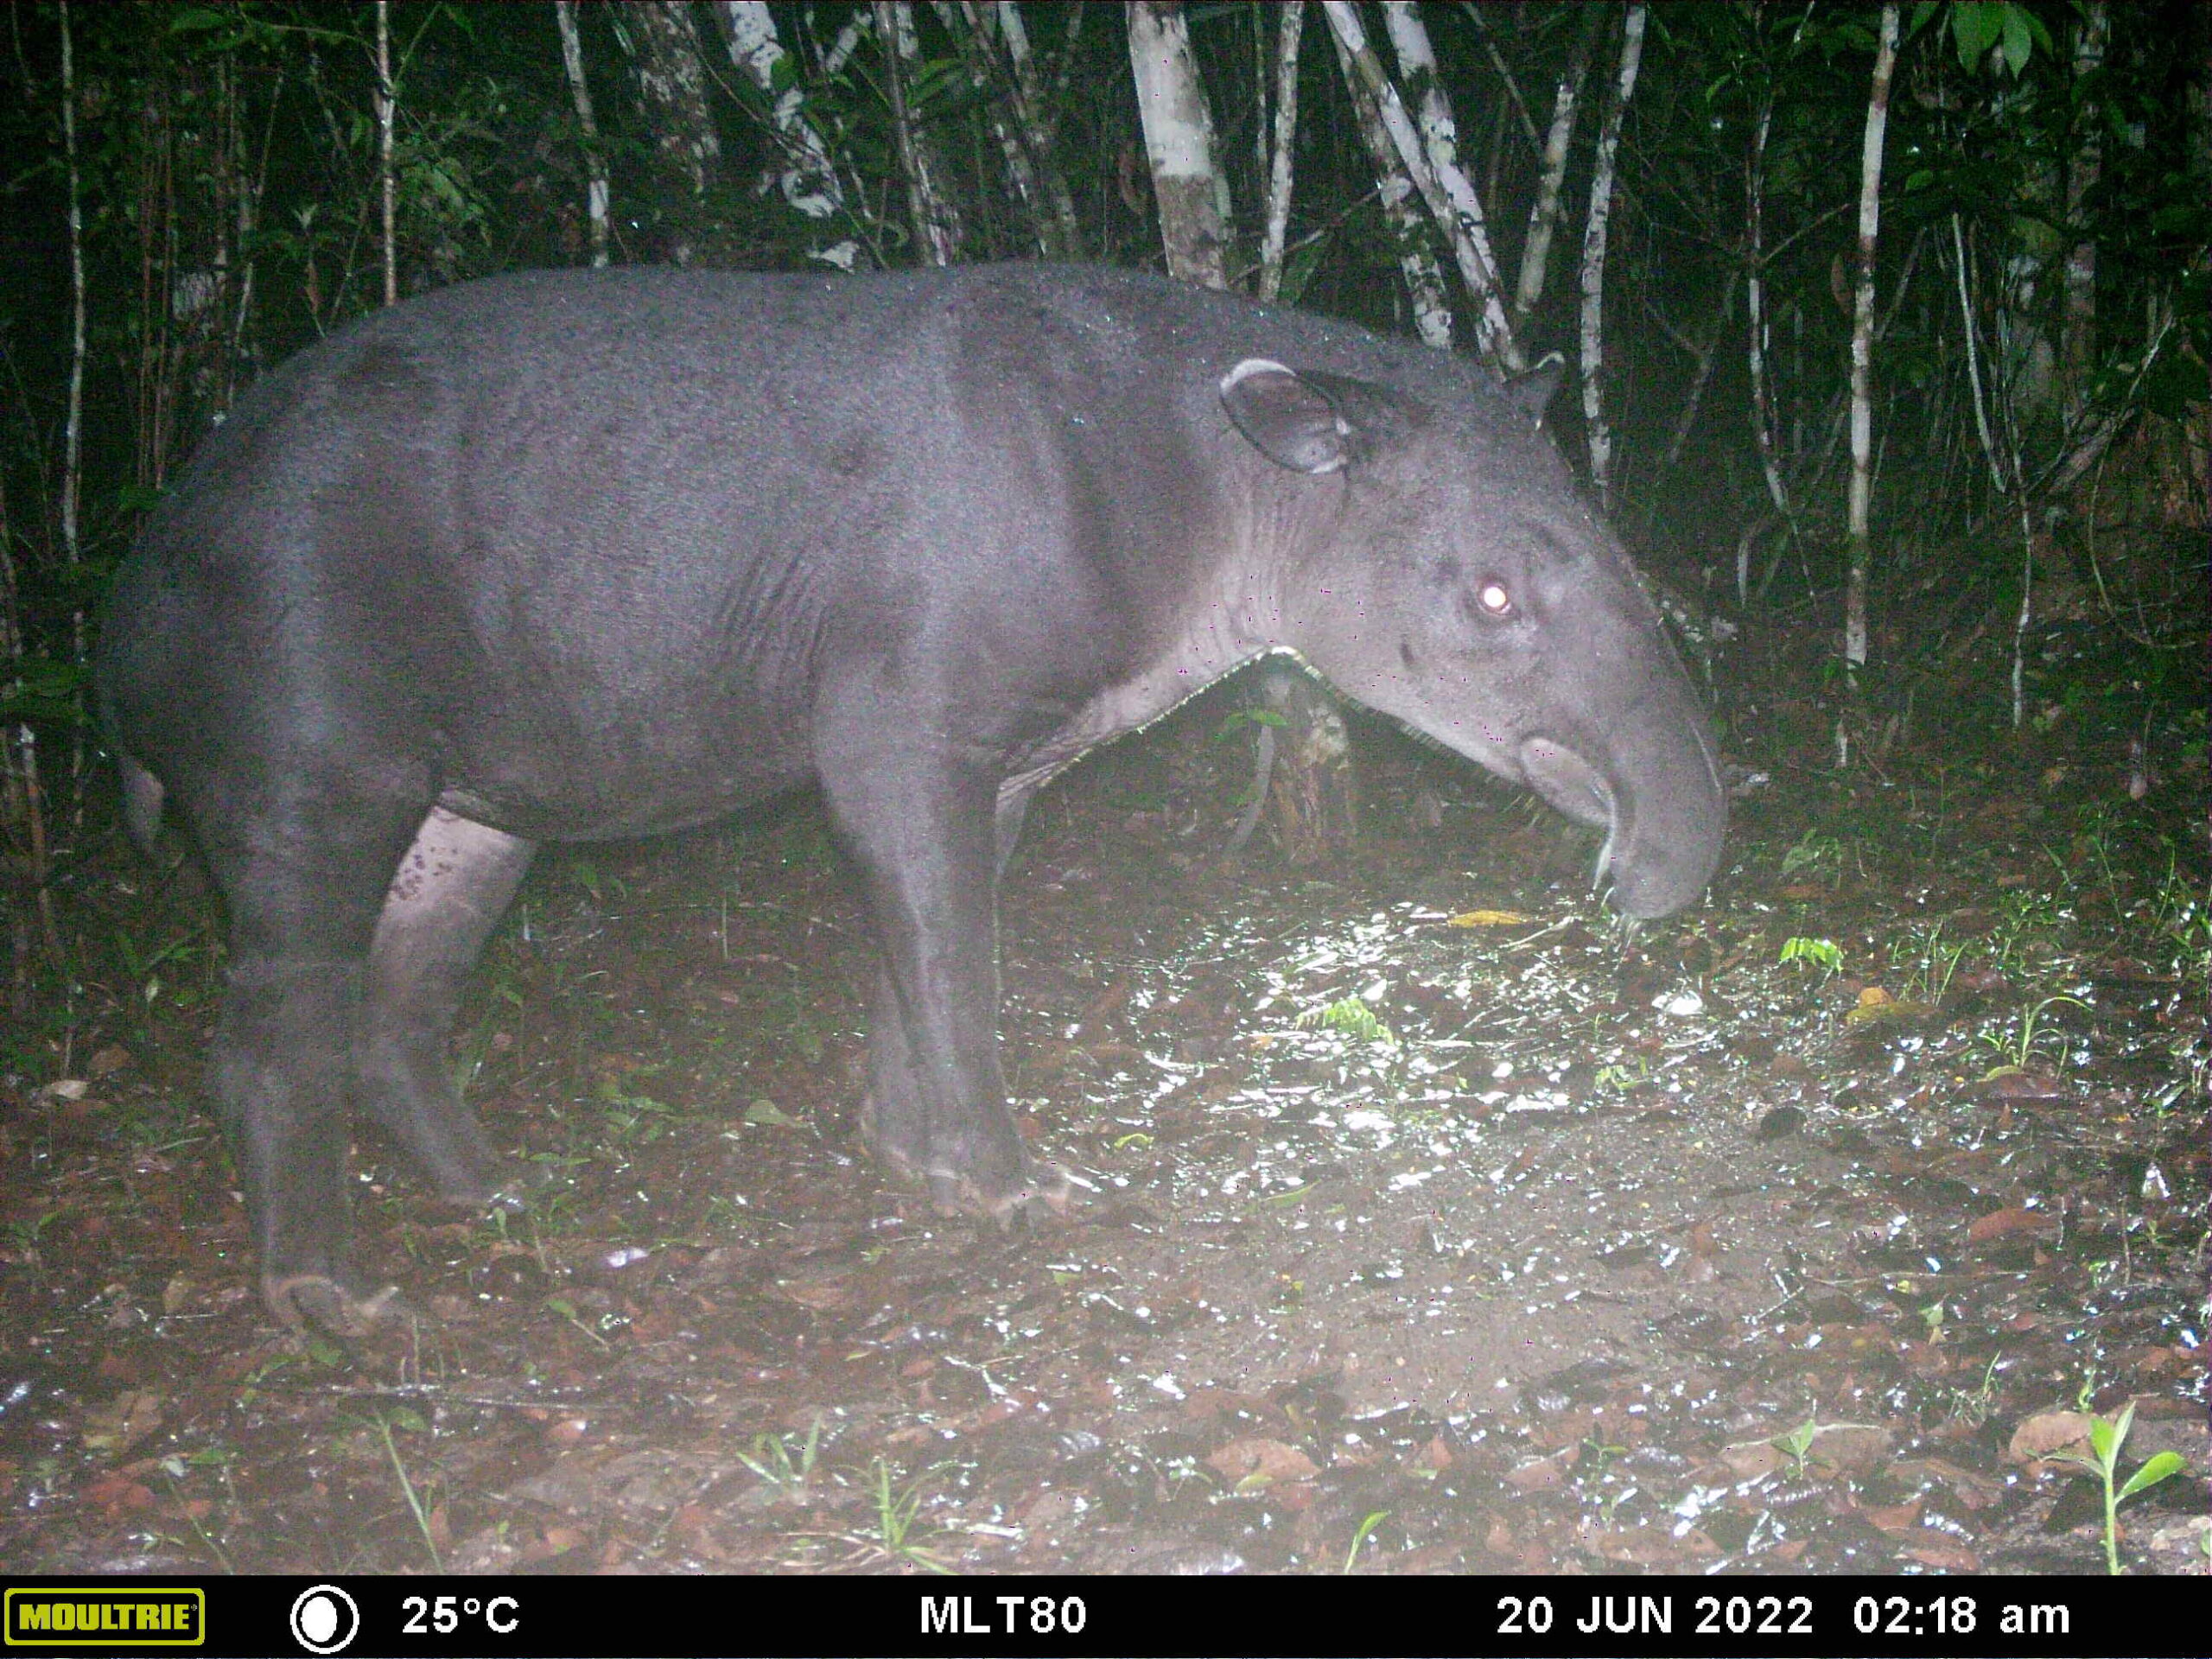 Captured at Chan Chich Lodge, this stunning photo showcases the majestic tapir in its natural habitat.